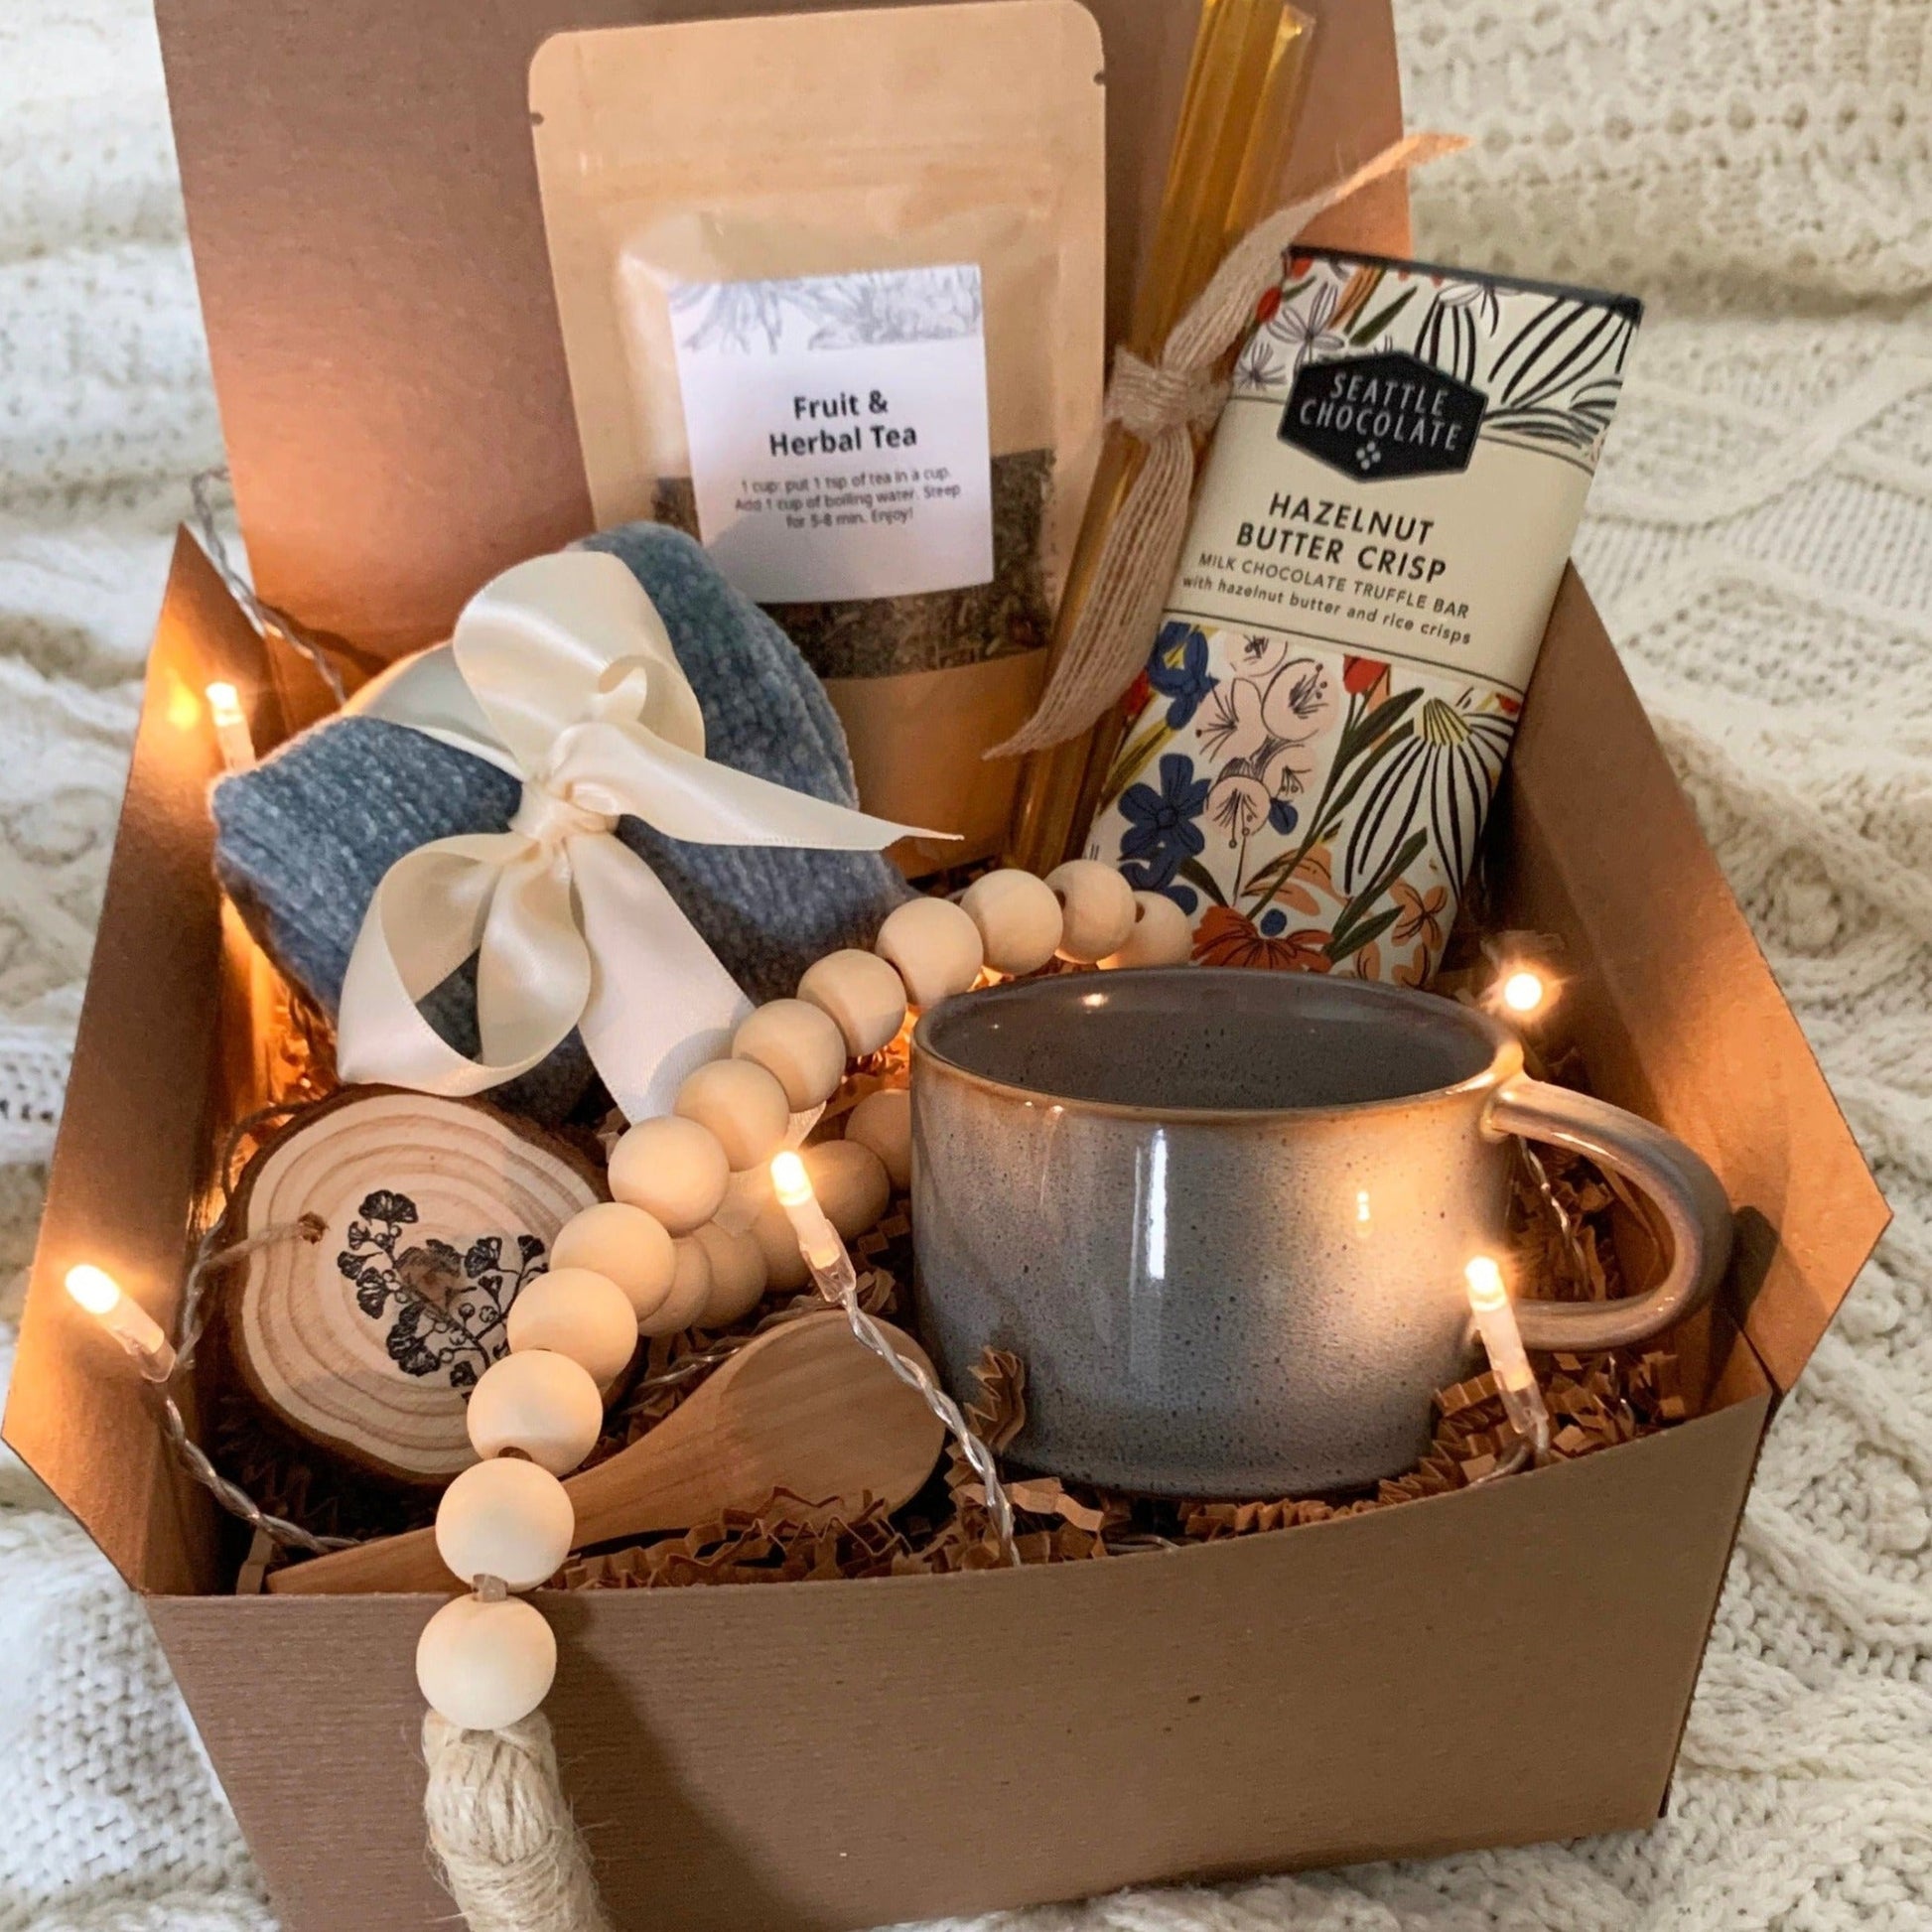 Get Well Soon Gifts box for women, Care Package, Sympathy Self-Care Gifts  for Loved ones